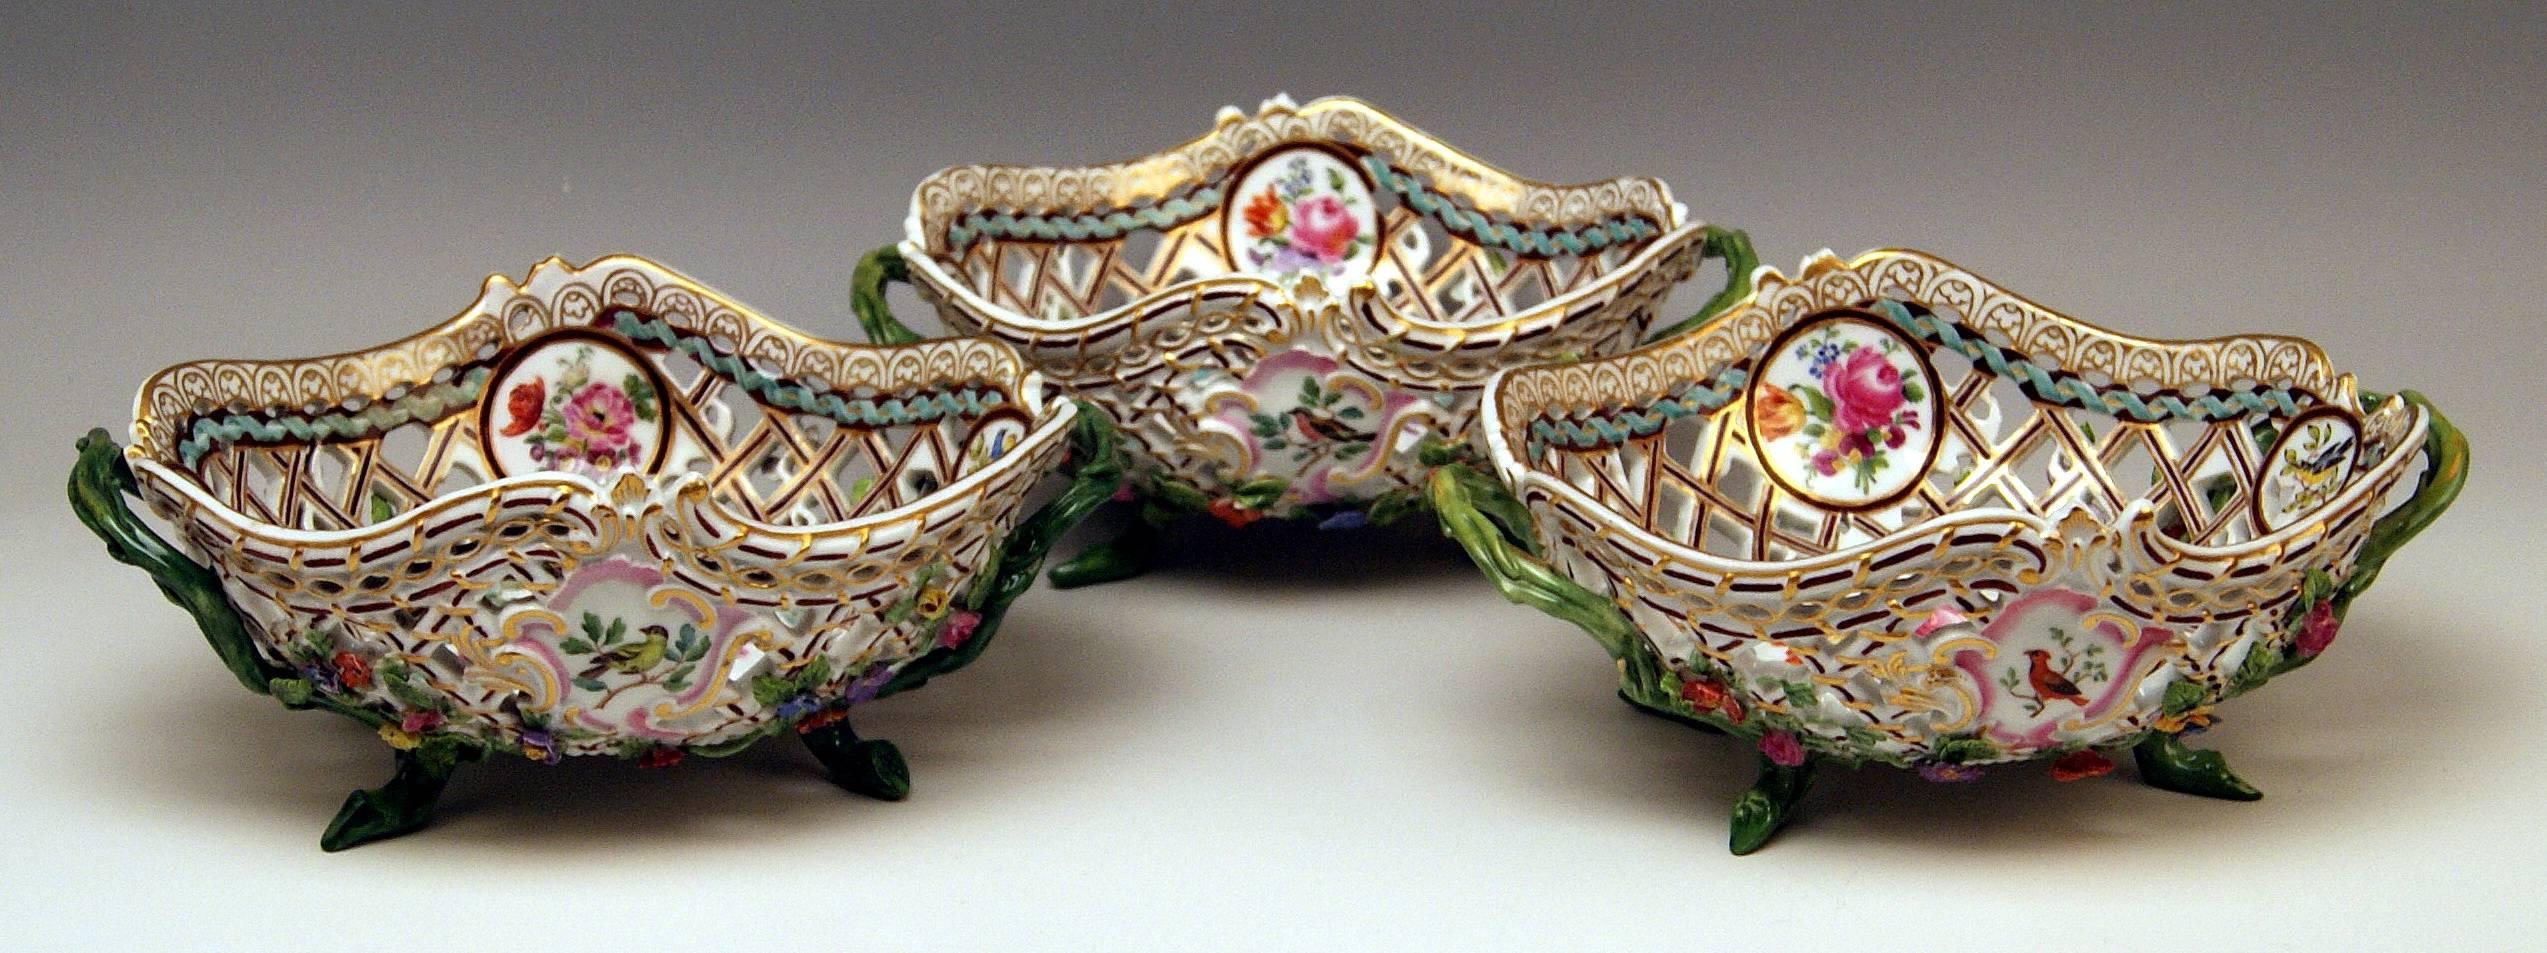 Painted Meissen Set of Three Oval Reticulated Basket Bowls with Flowers, circa 1850